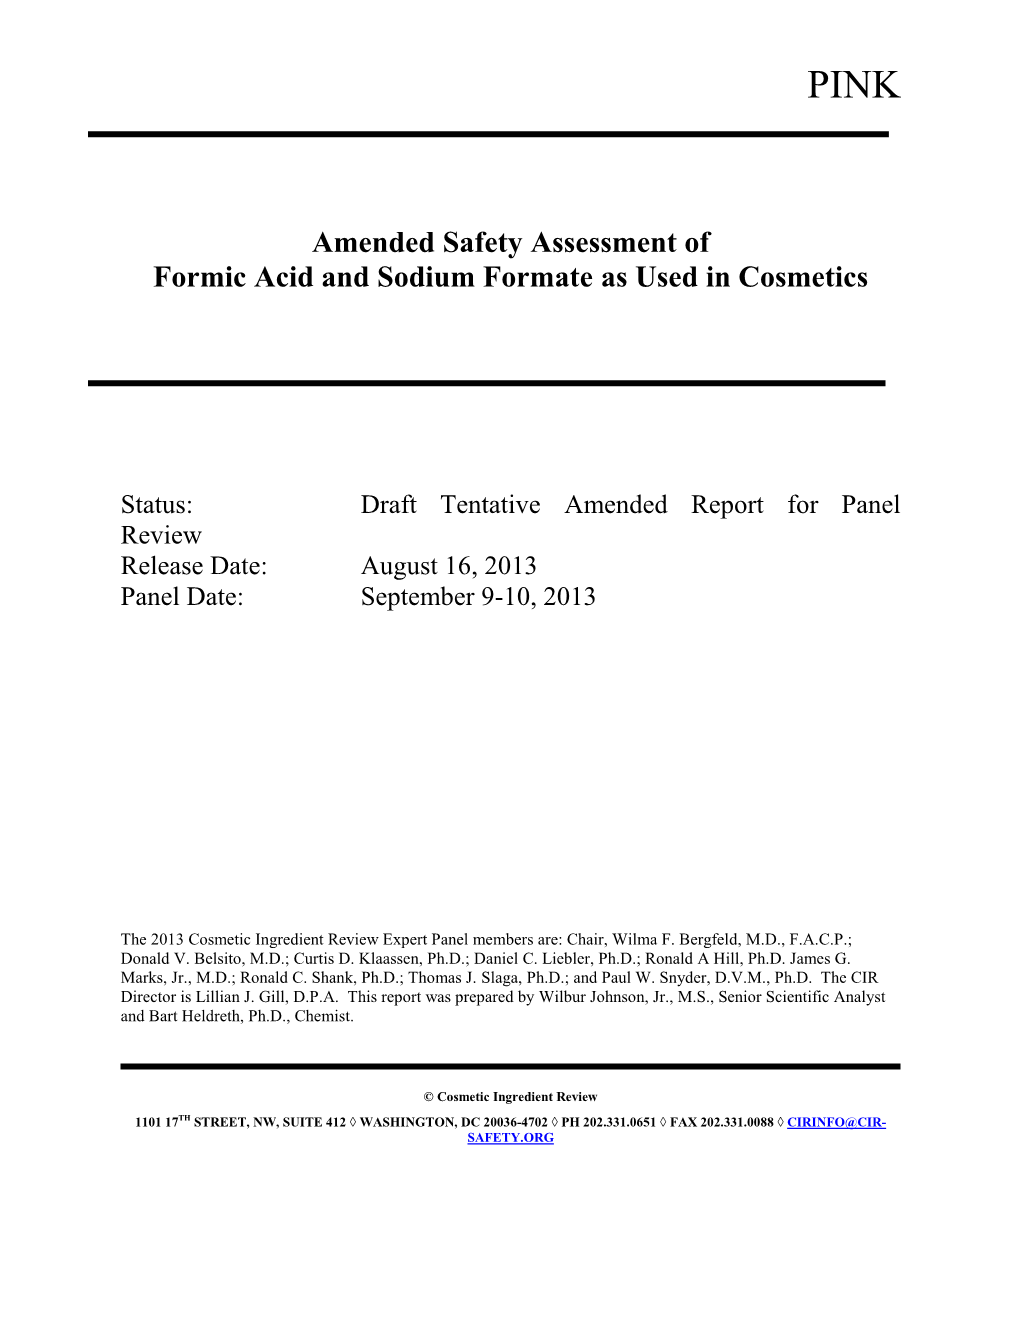 Amended Safety Assessment of Formic Acid and Sodium Formate As Used in Cosmetics